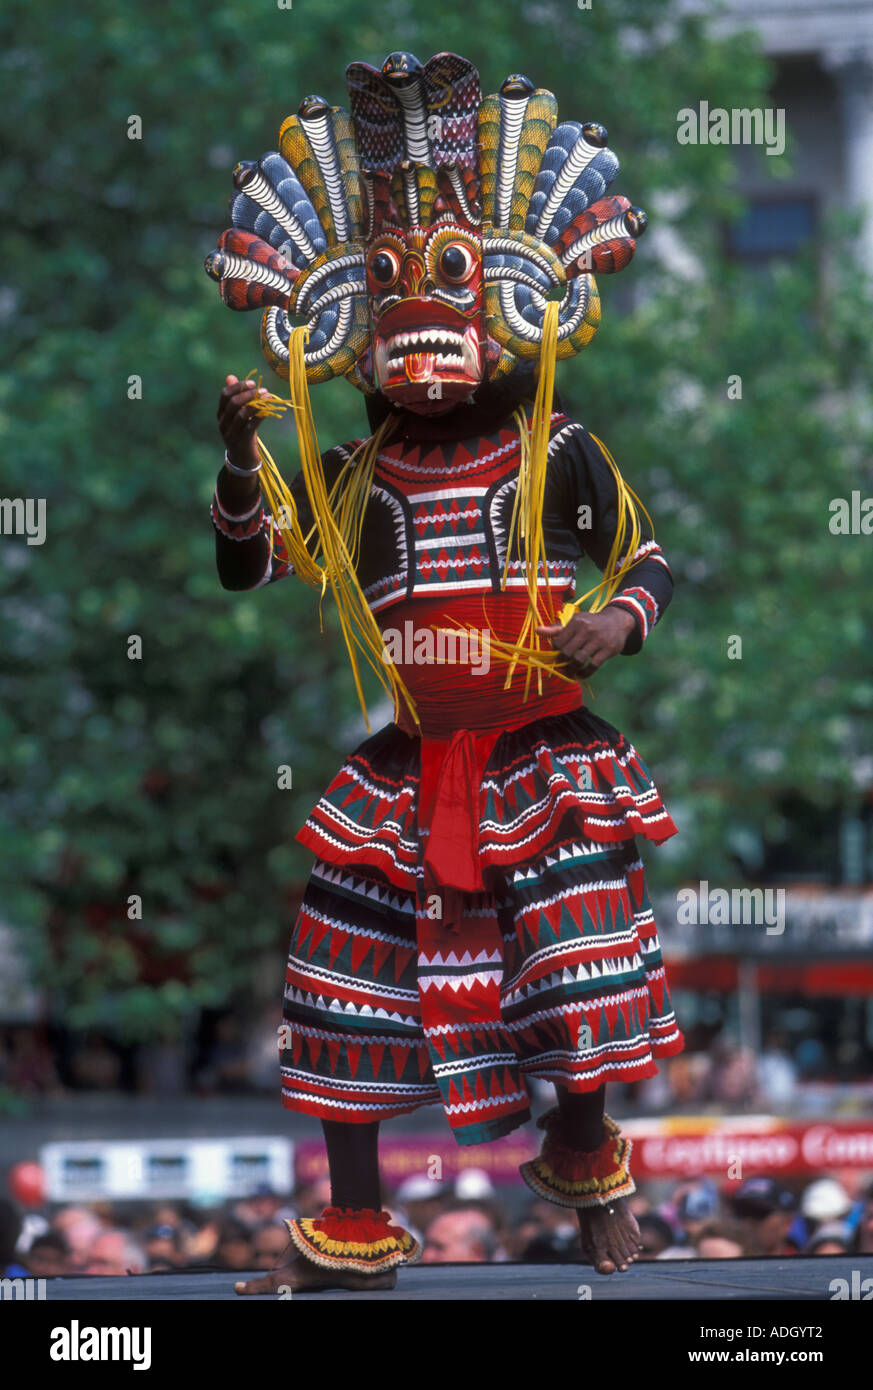 A dancer wearing a traditional Sri Lankan mask at a Festival in London Stock Photo